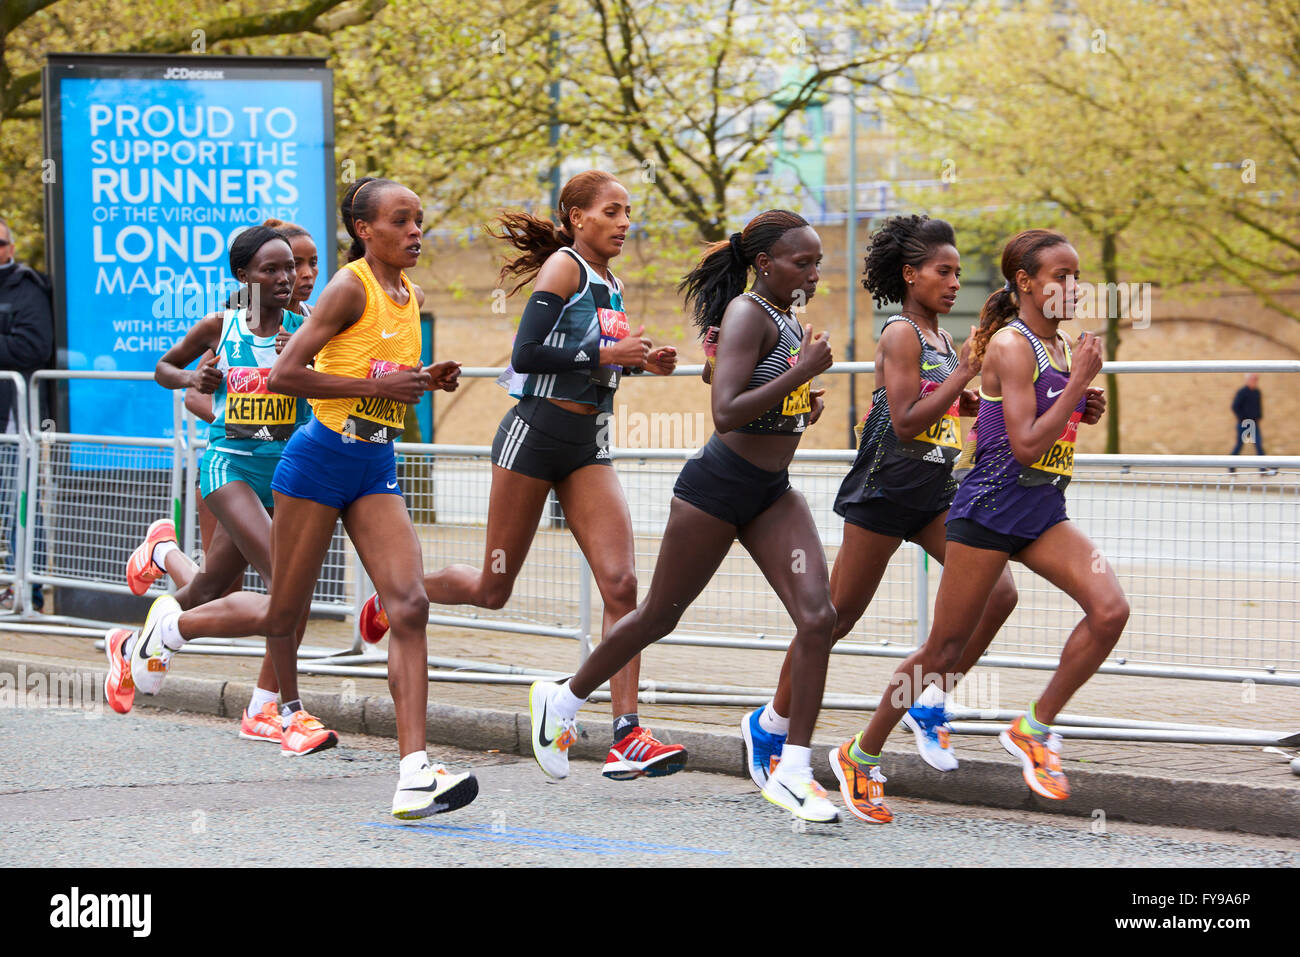 LONDON, UK - APRIL 24, 2016: Elite Women's Race leaders group competing for first position on the Virgin Money London Marathon 2016. Shot on the 20 mile stretch, on West India Dock Road. Stock Photo